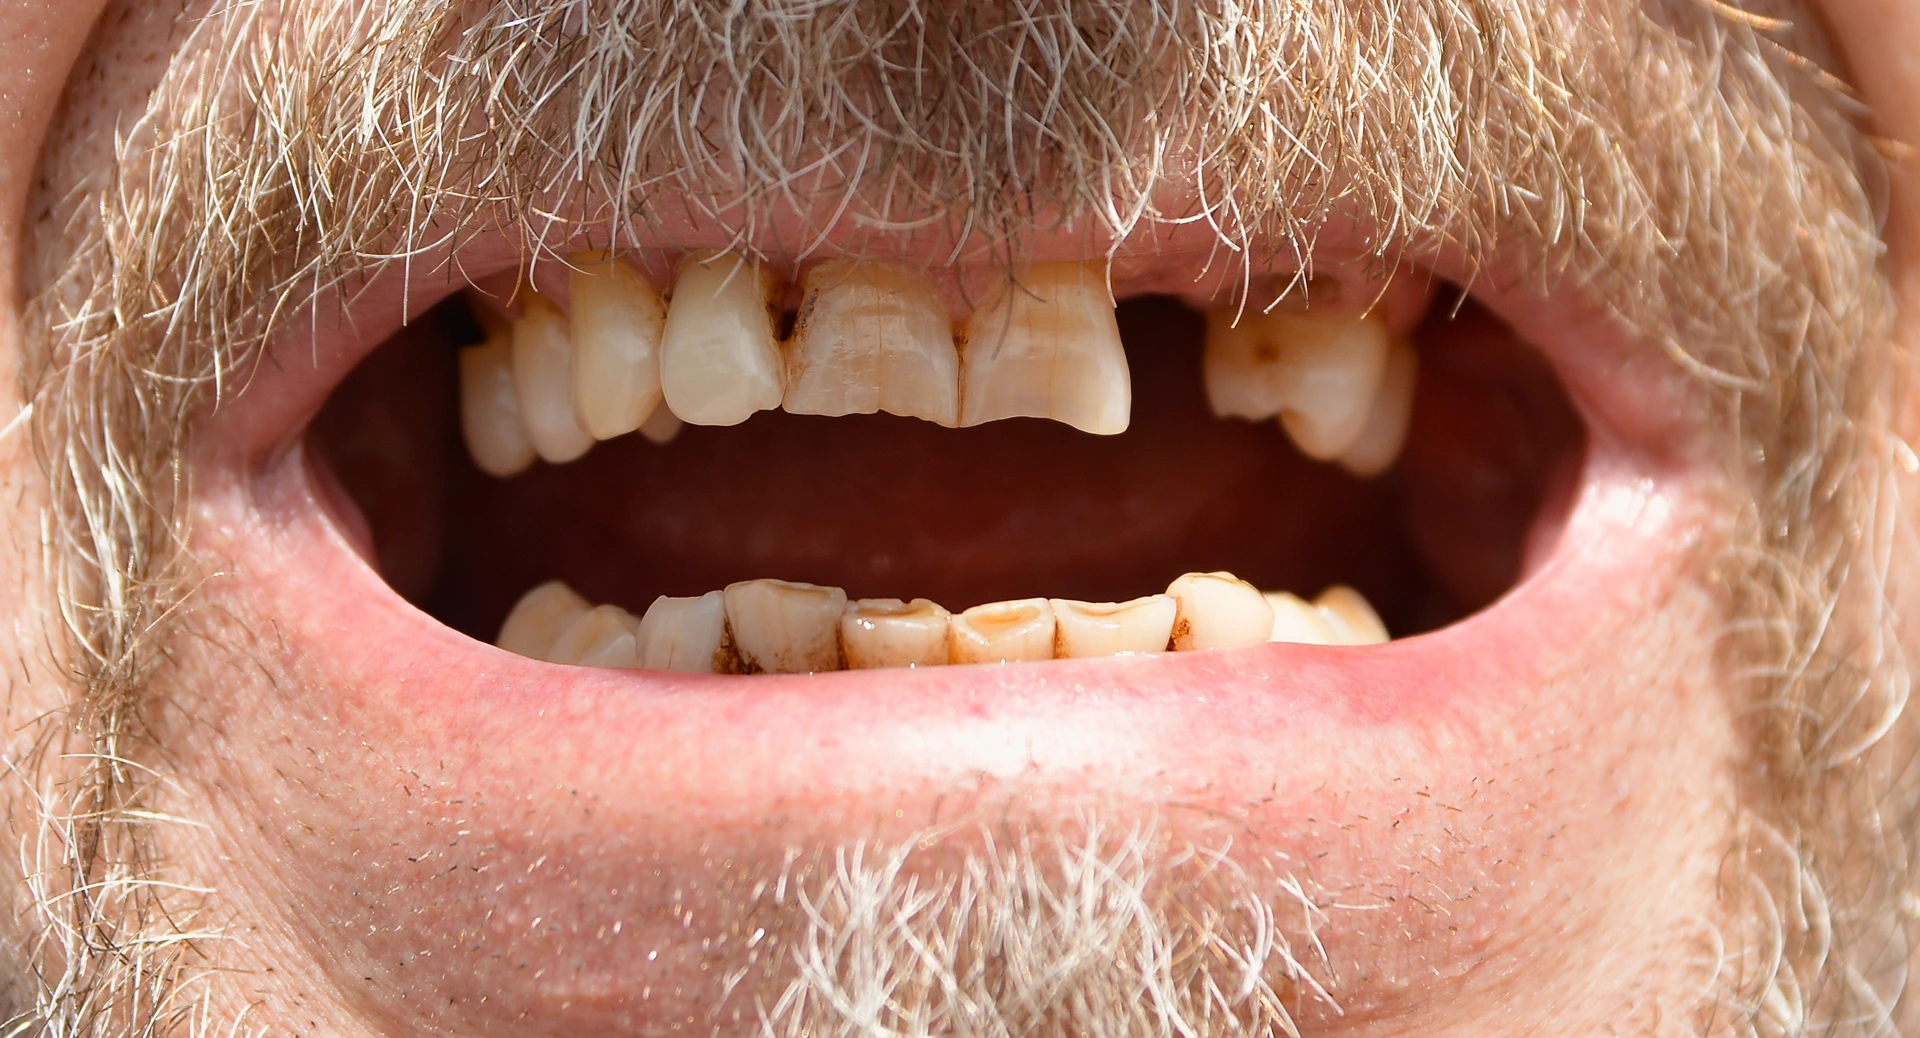 What teeth problems can tell about your overall health